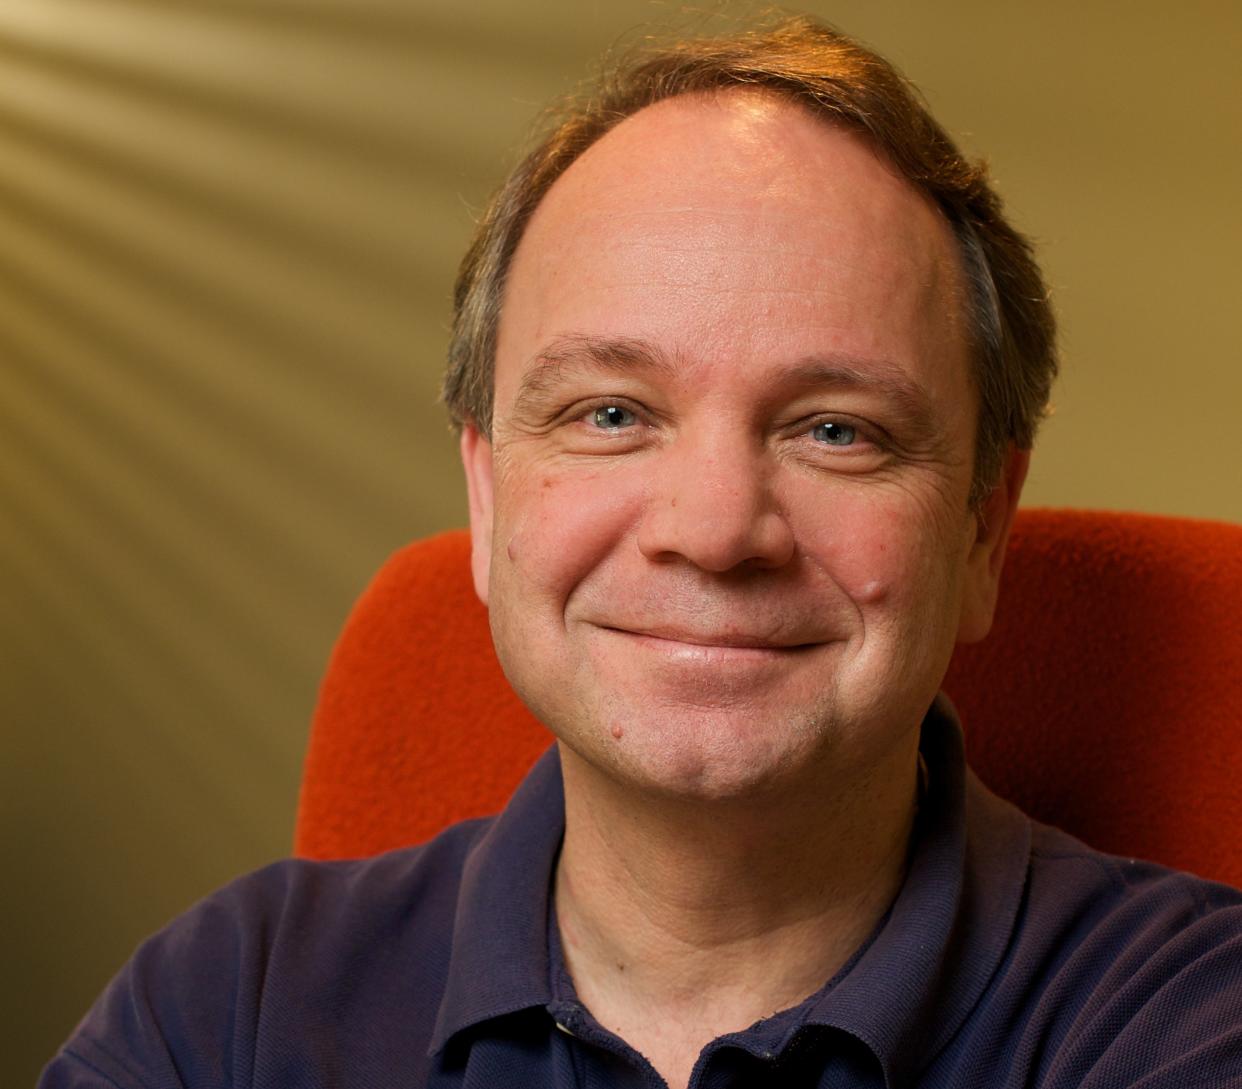 Sid Meier: 'There’s a whole new generation of gamers who’ve grown up knowing games their entire life' (Tom Bass)